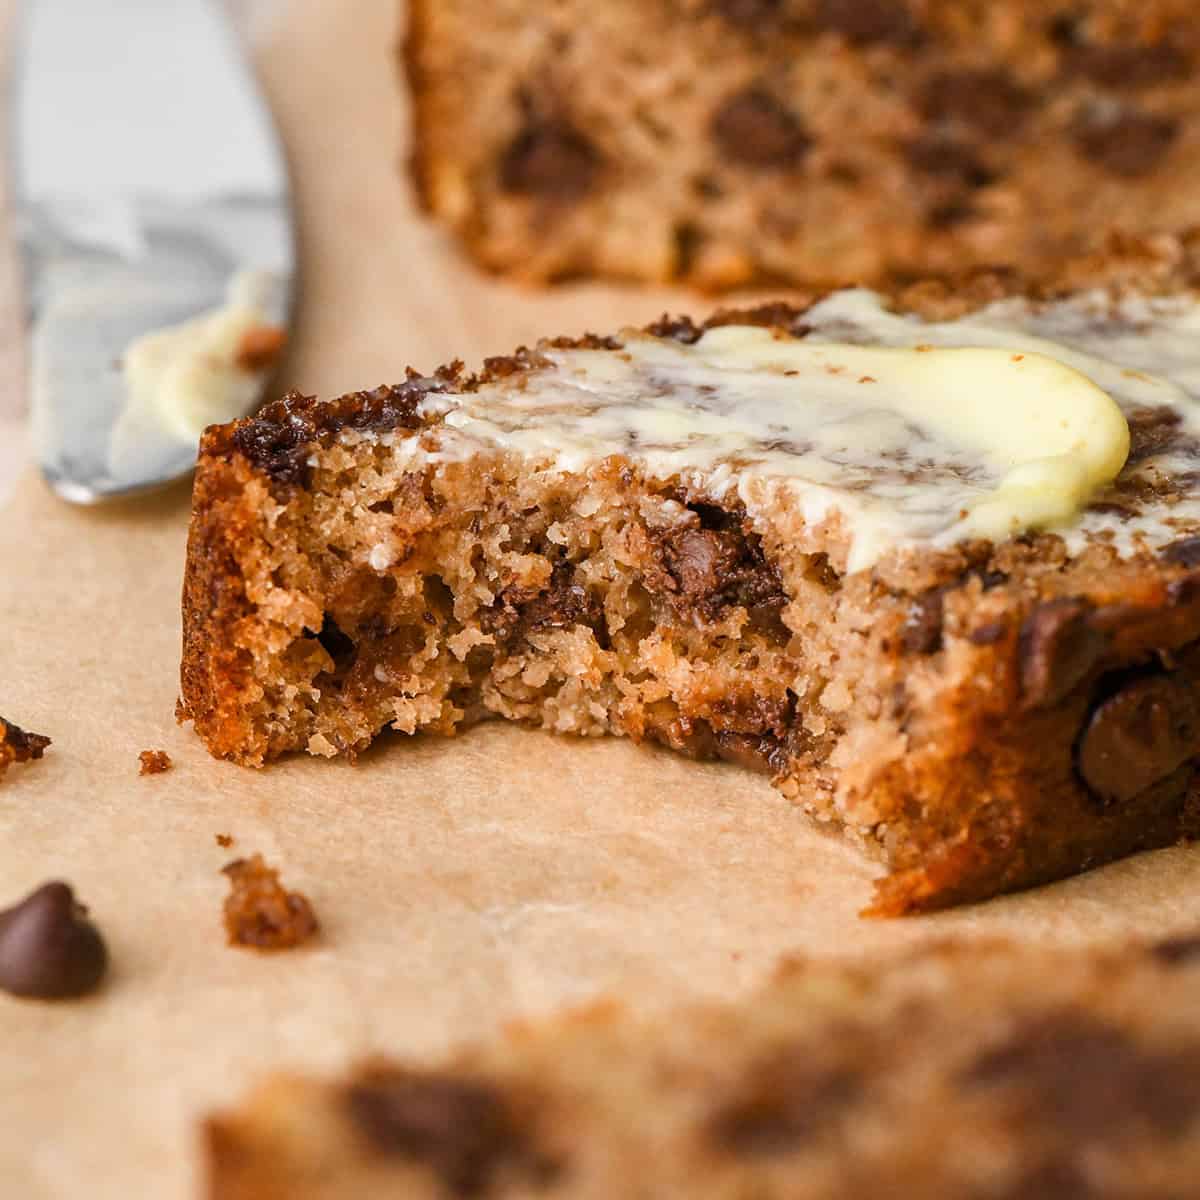 front view of a slice of Paleo Banana Bread with butter on top and a bite taken out of it